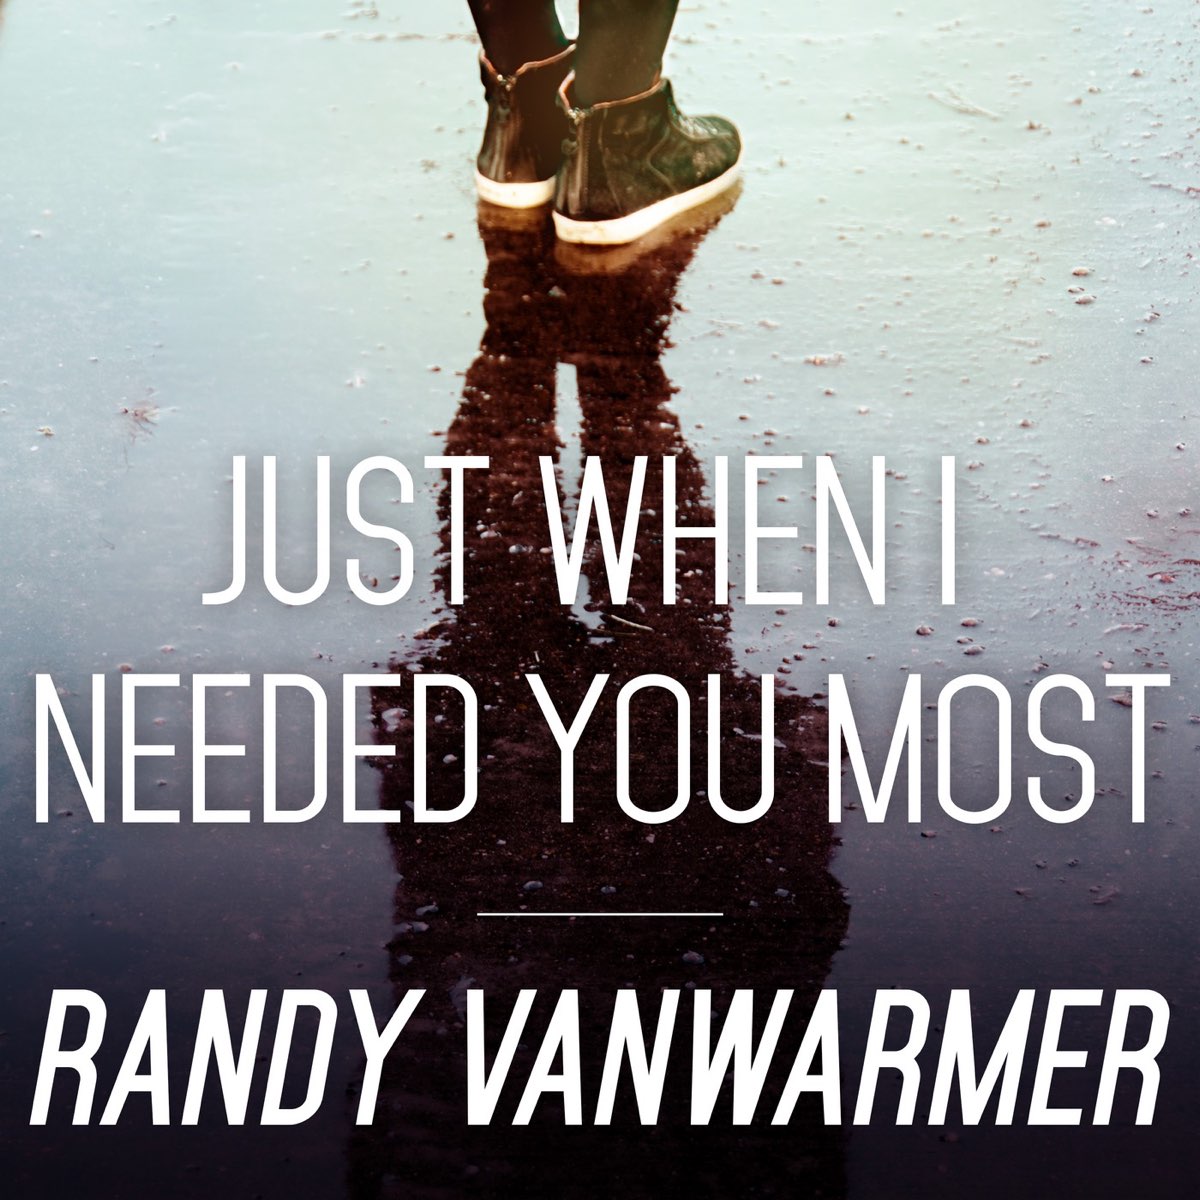 I need you most. Randy VANWARMER - just when i need you most. Needed you.